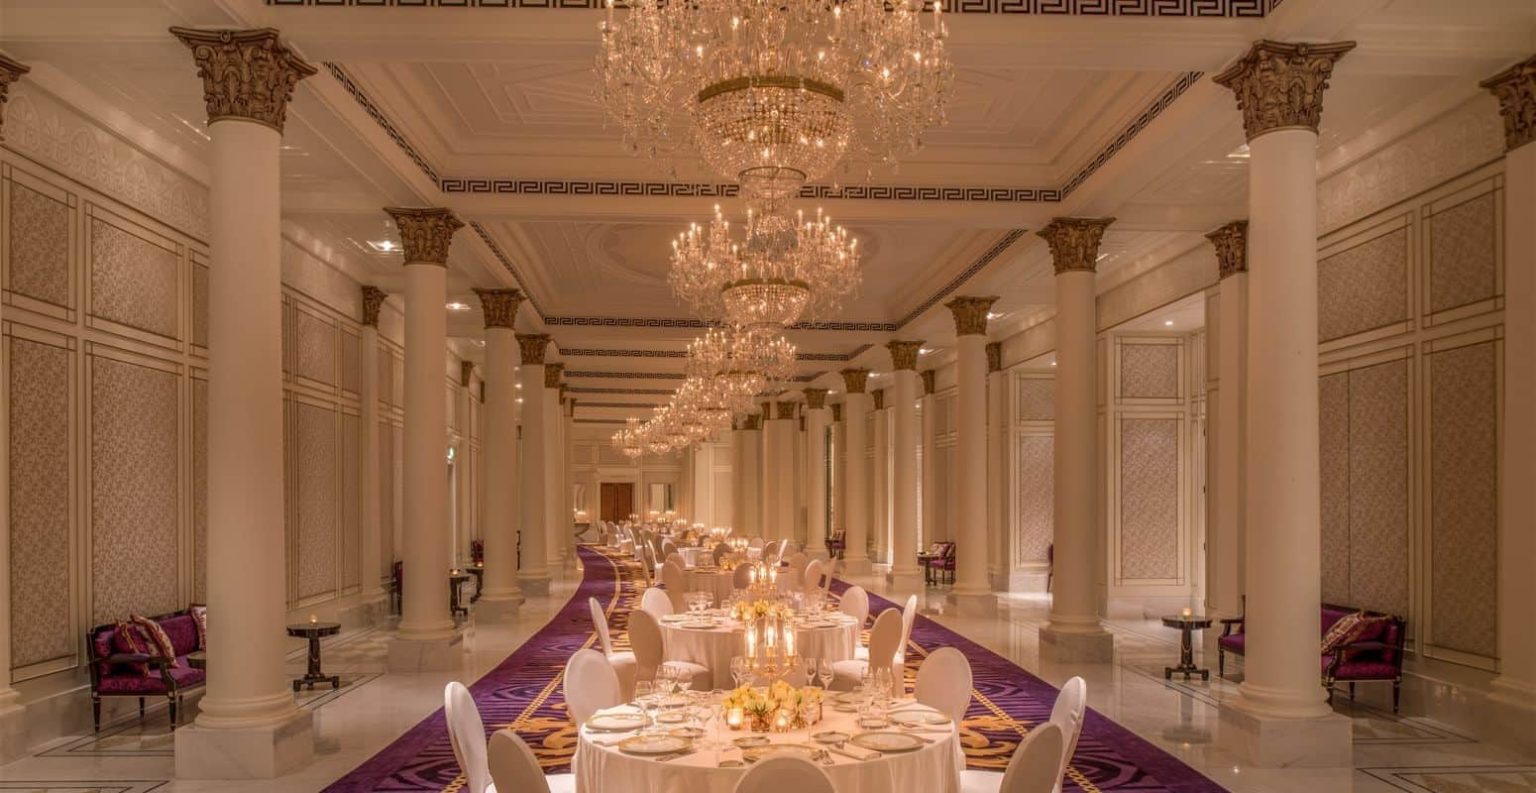 Banquet table set up in an event room at Palazzo Versace Dubai Hotel